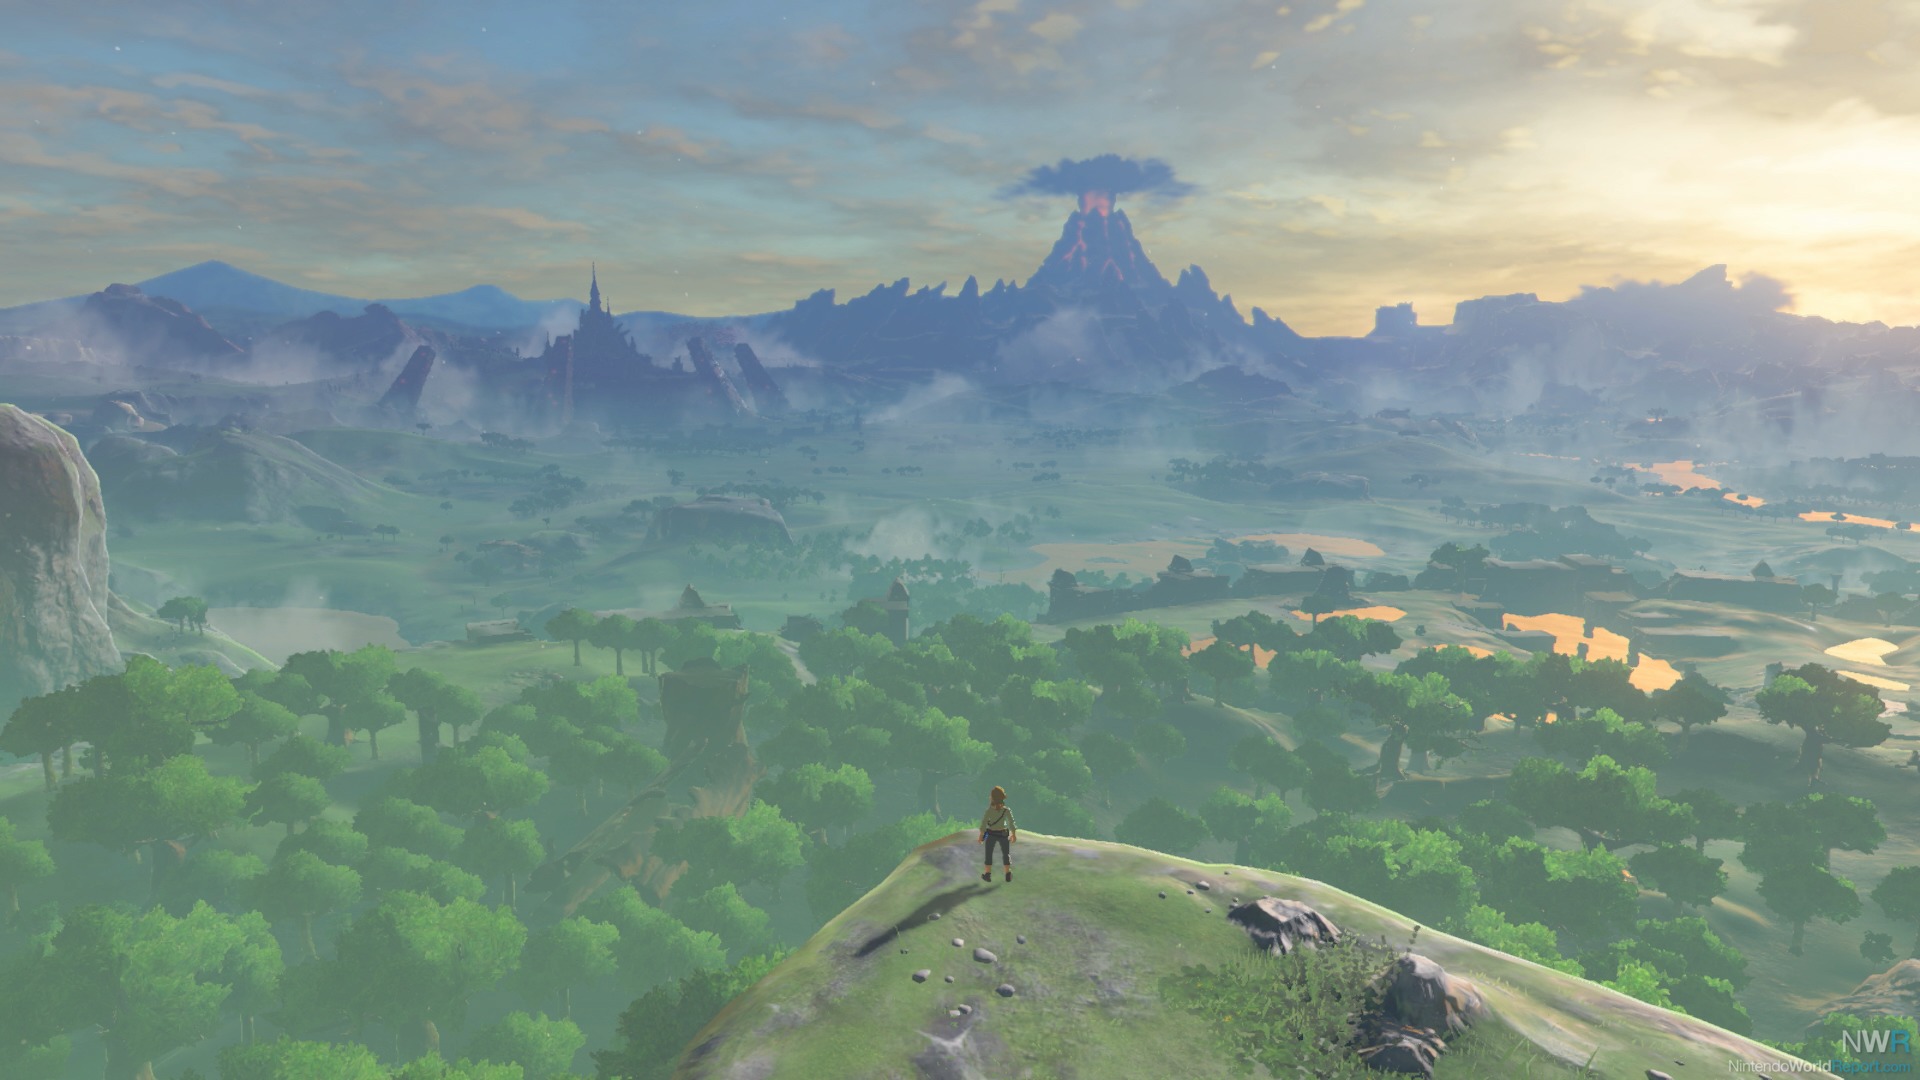 The Legend of Zelda: Breath of the Wild reviews, all the scores